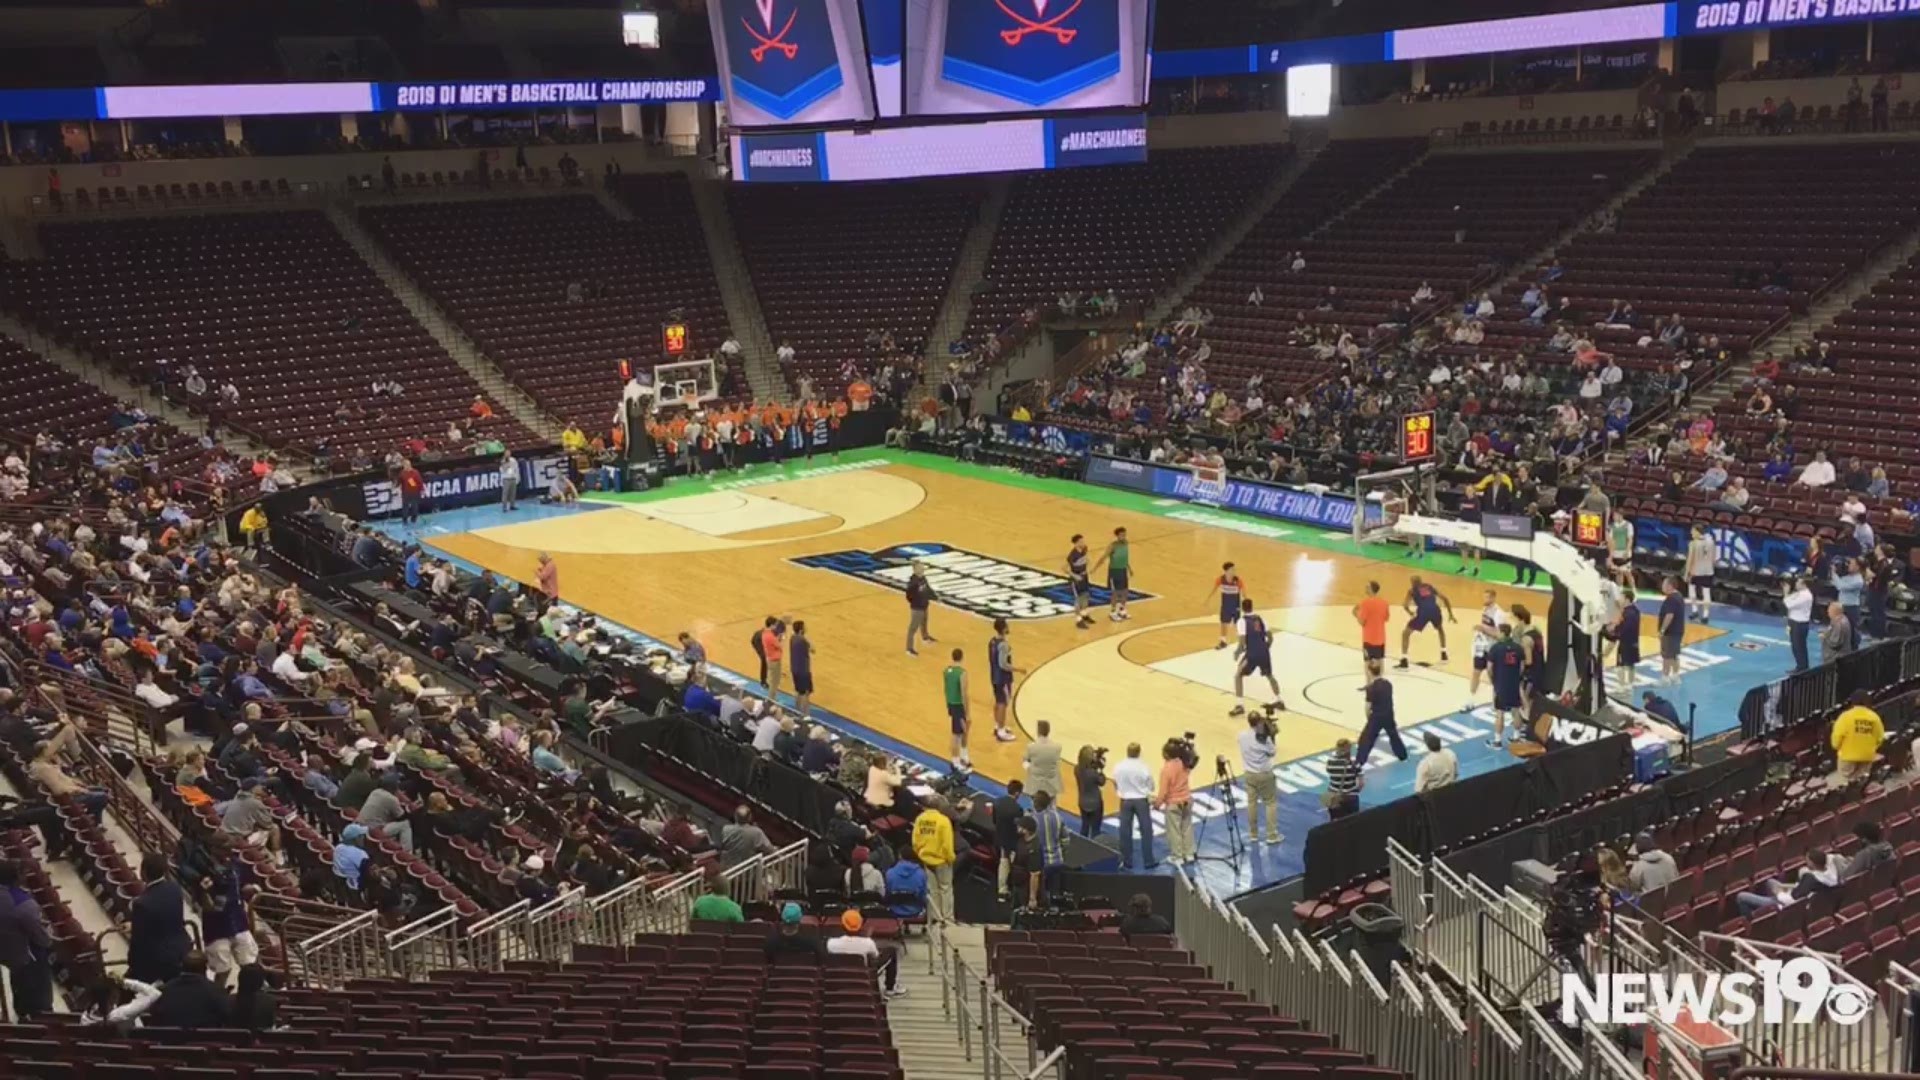 The Virginia Cavaliers practiced for their opening round game in Columbia, SC for the NCAA March Madness tournament.